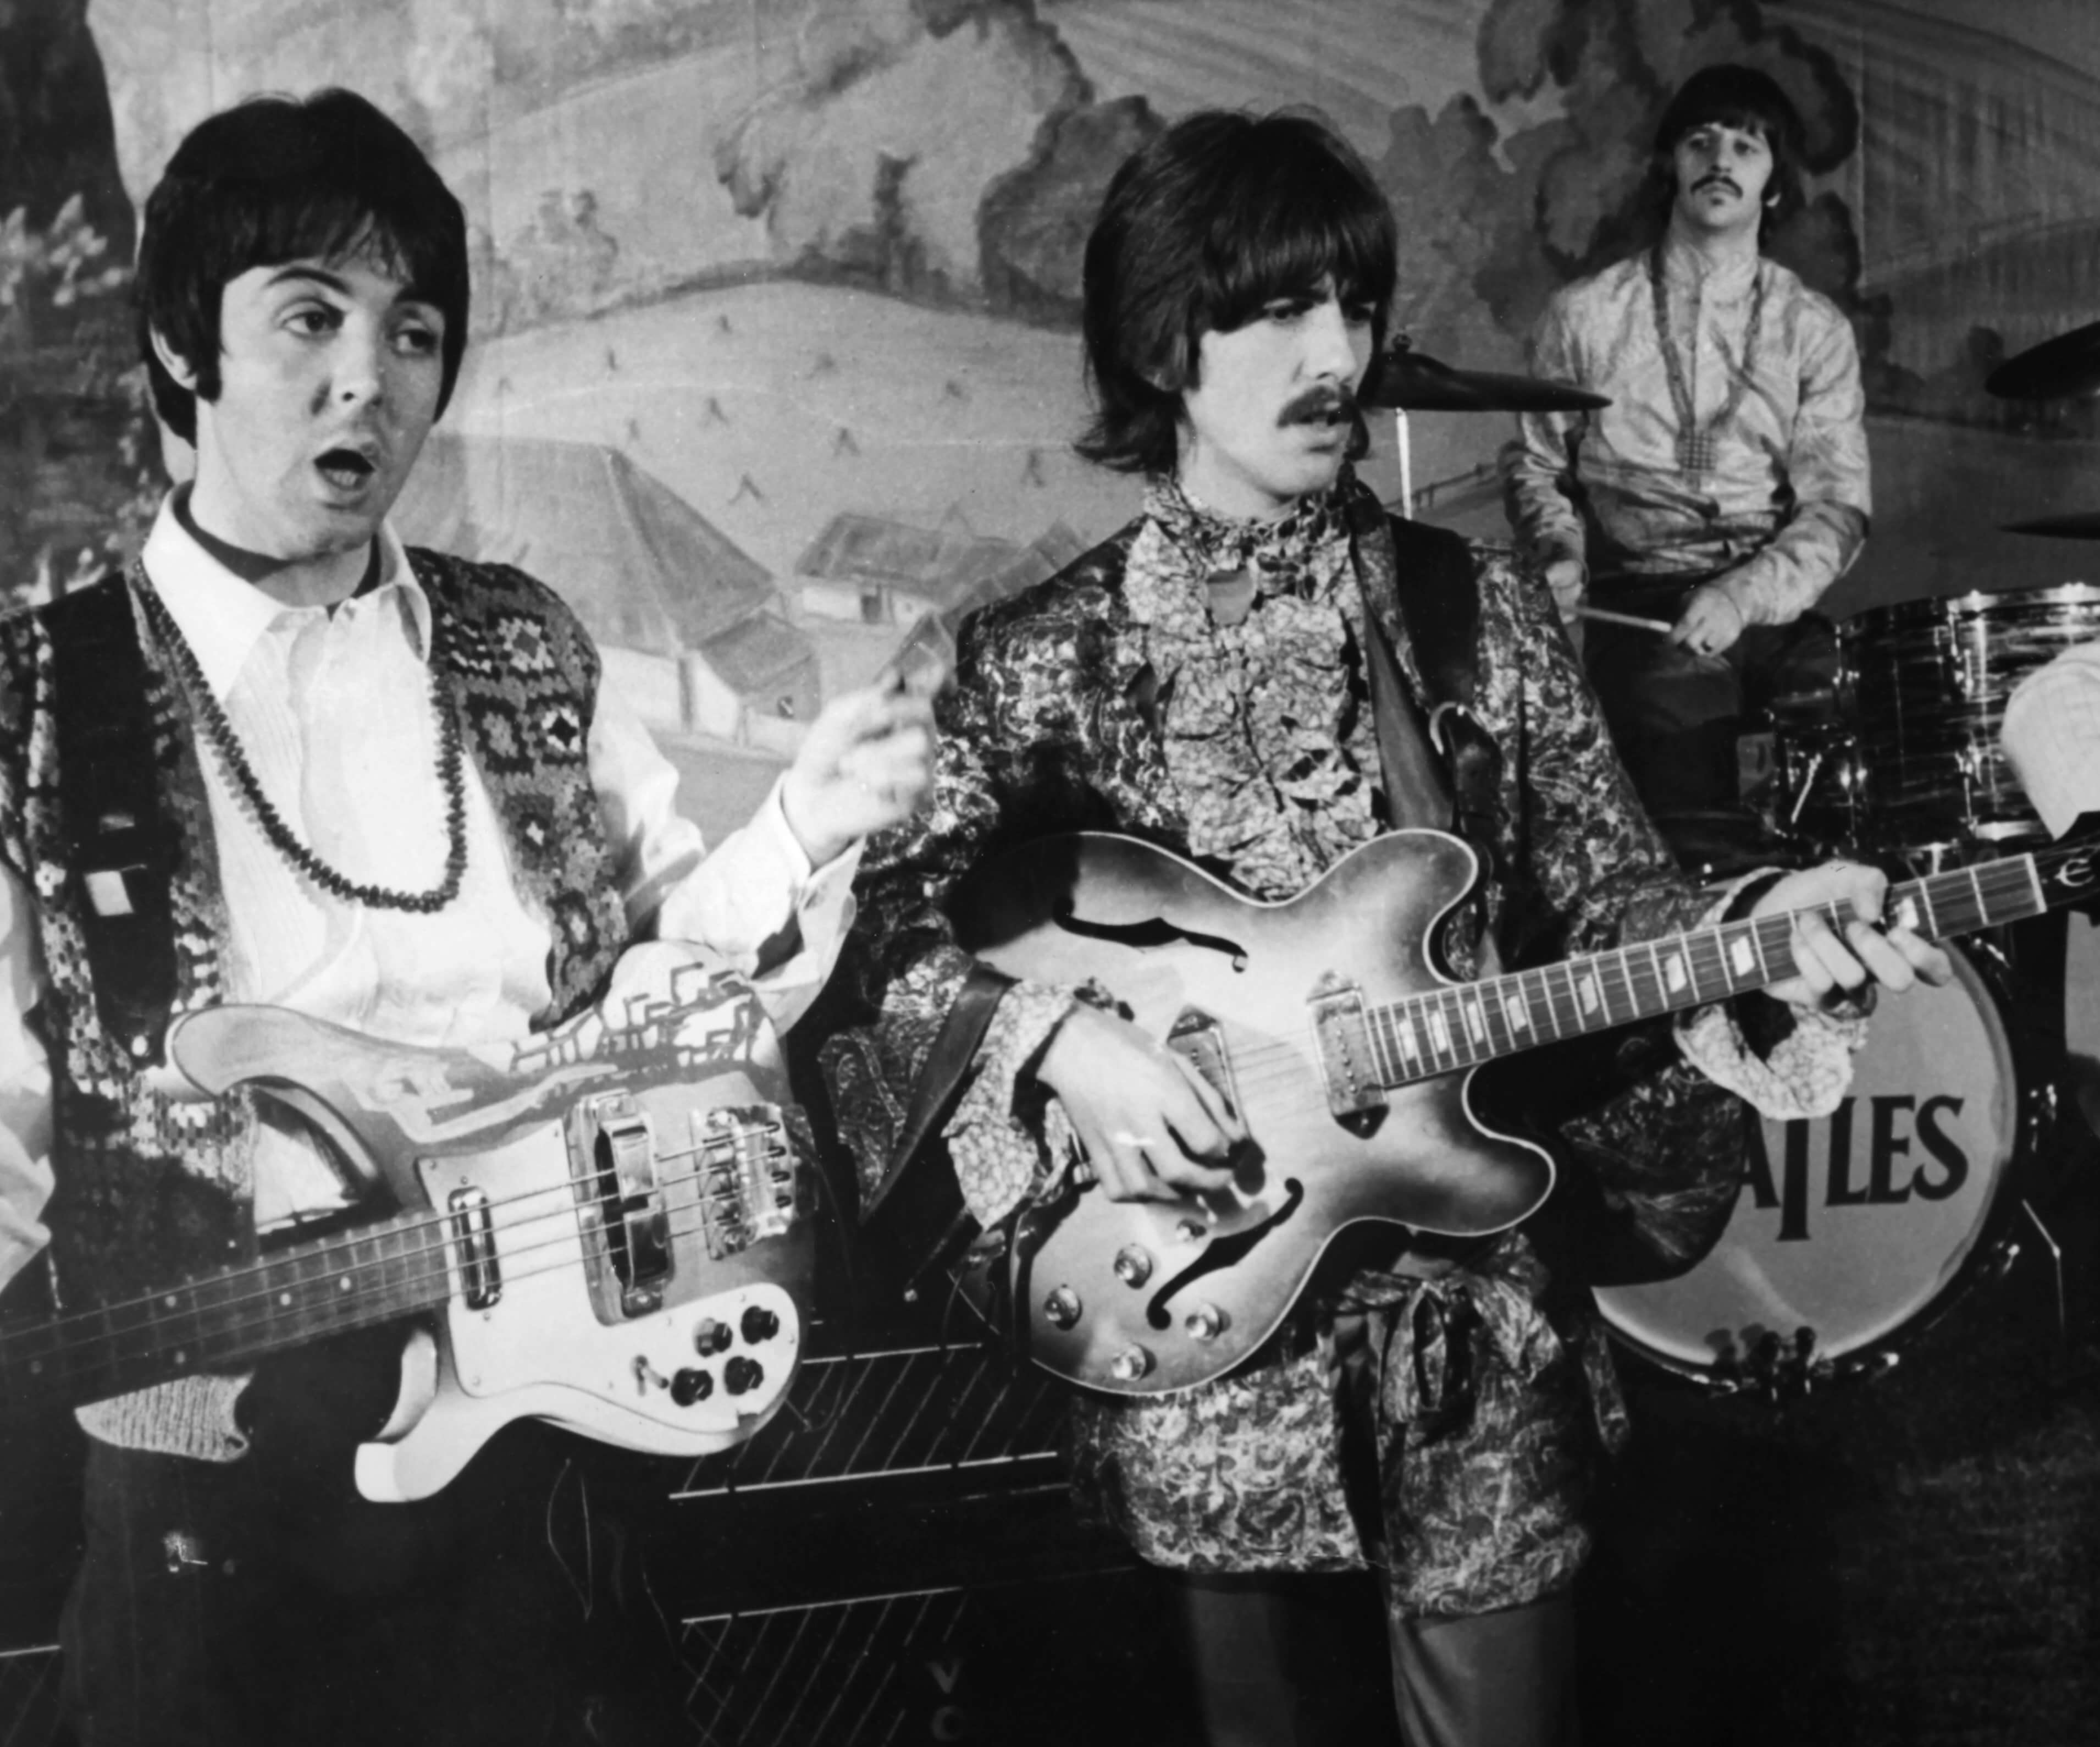 Paul McCartney, George Harrison, and Ringo Starr playing instruments during The Beatles' "Strawberry Fields Forever" era